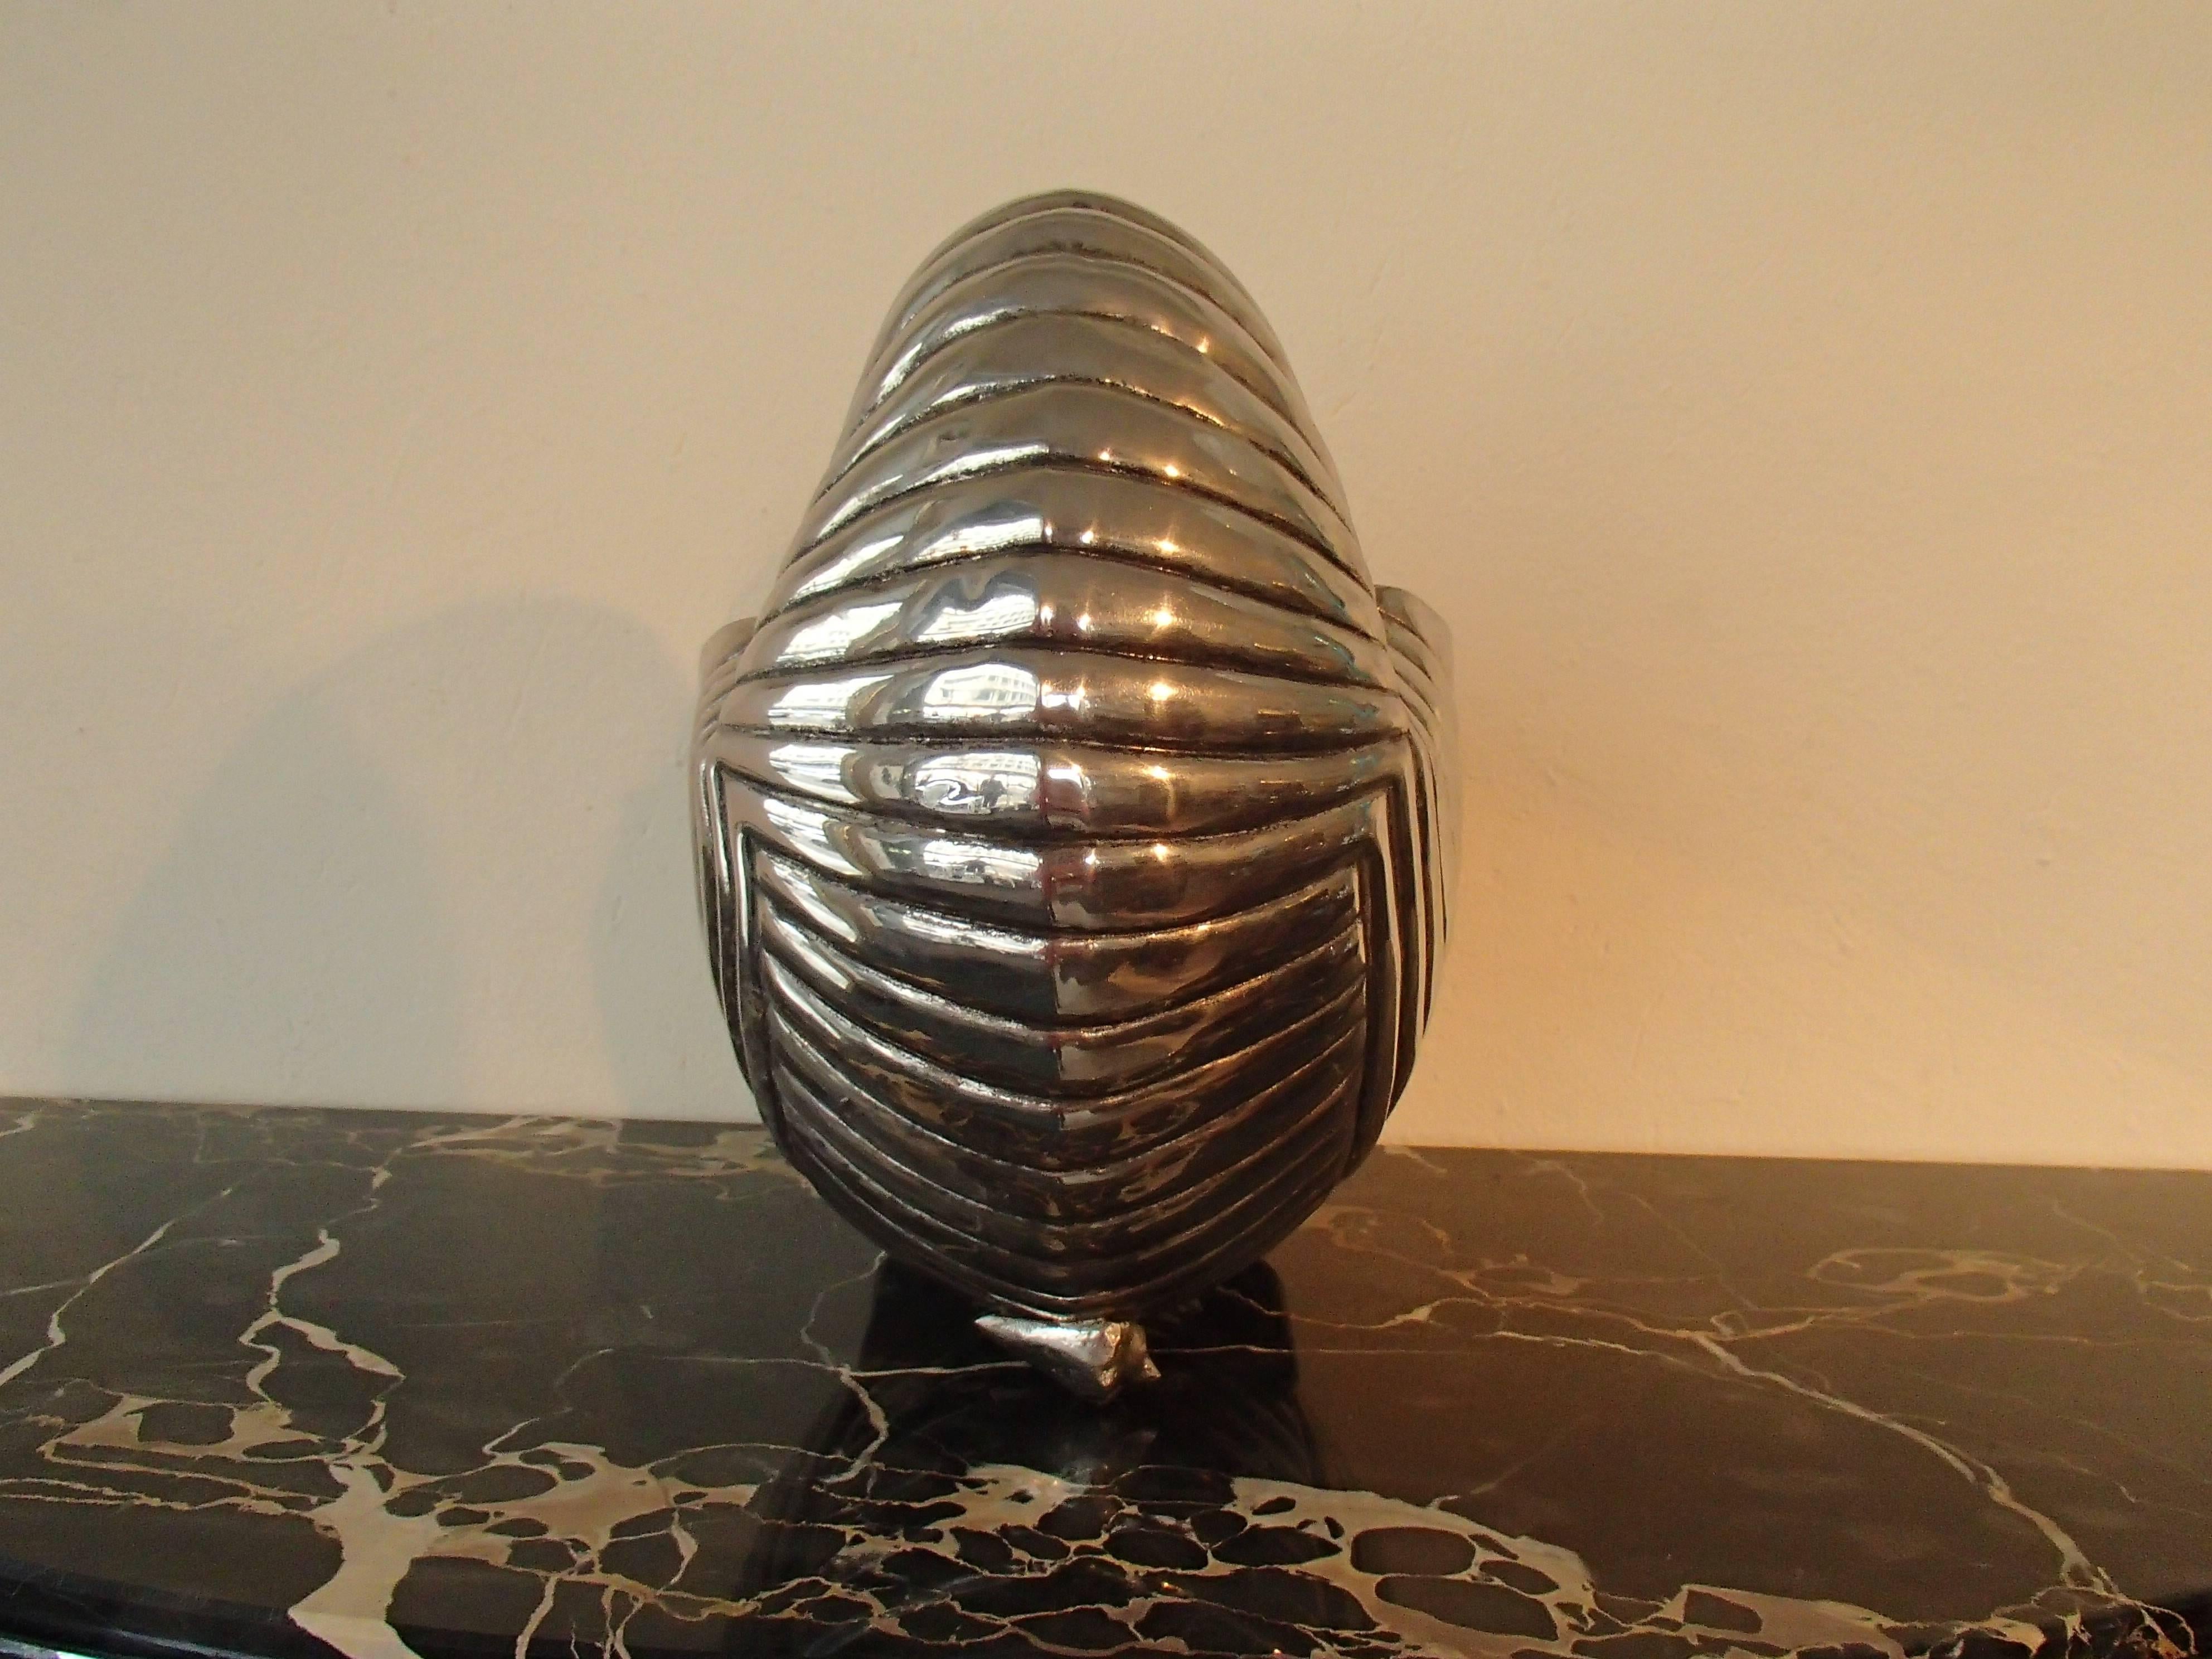 Modern Champagne or Vine Cooler like a Shell Seen in 